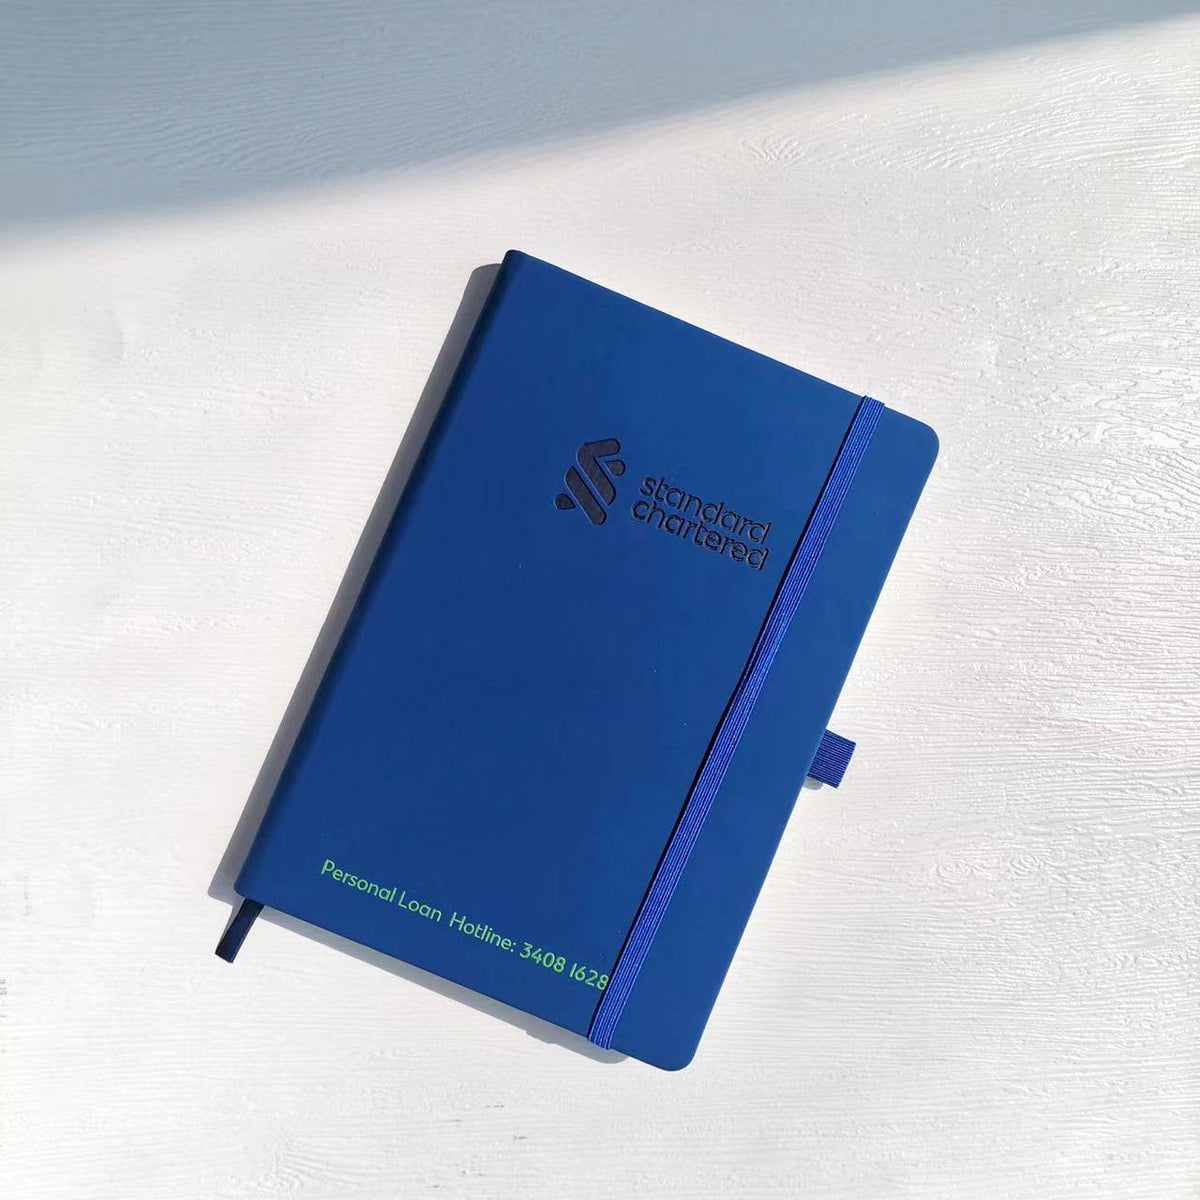 [Case Studies]Standard Chartered | A5 Notebook with Elastic Strap 鬆緊帶筆記本